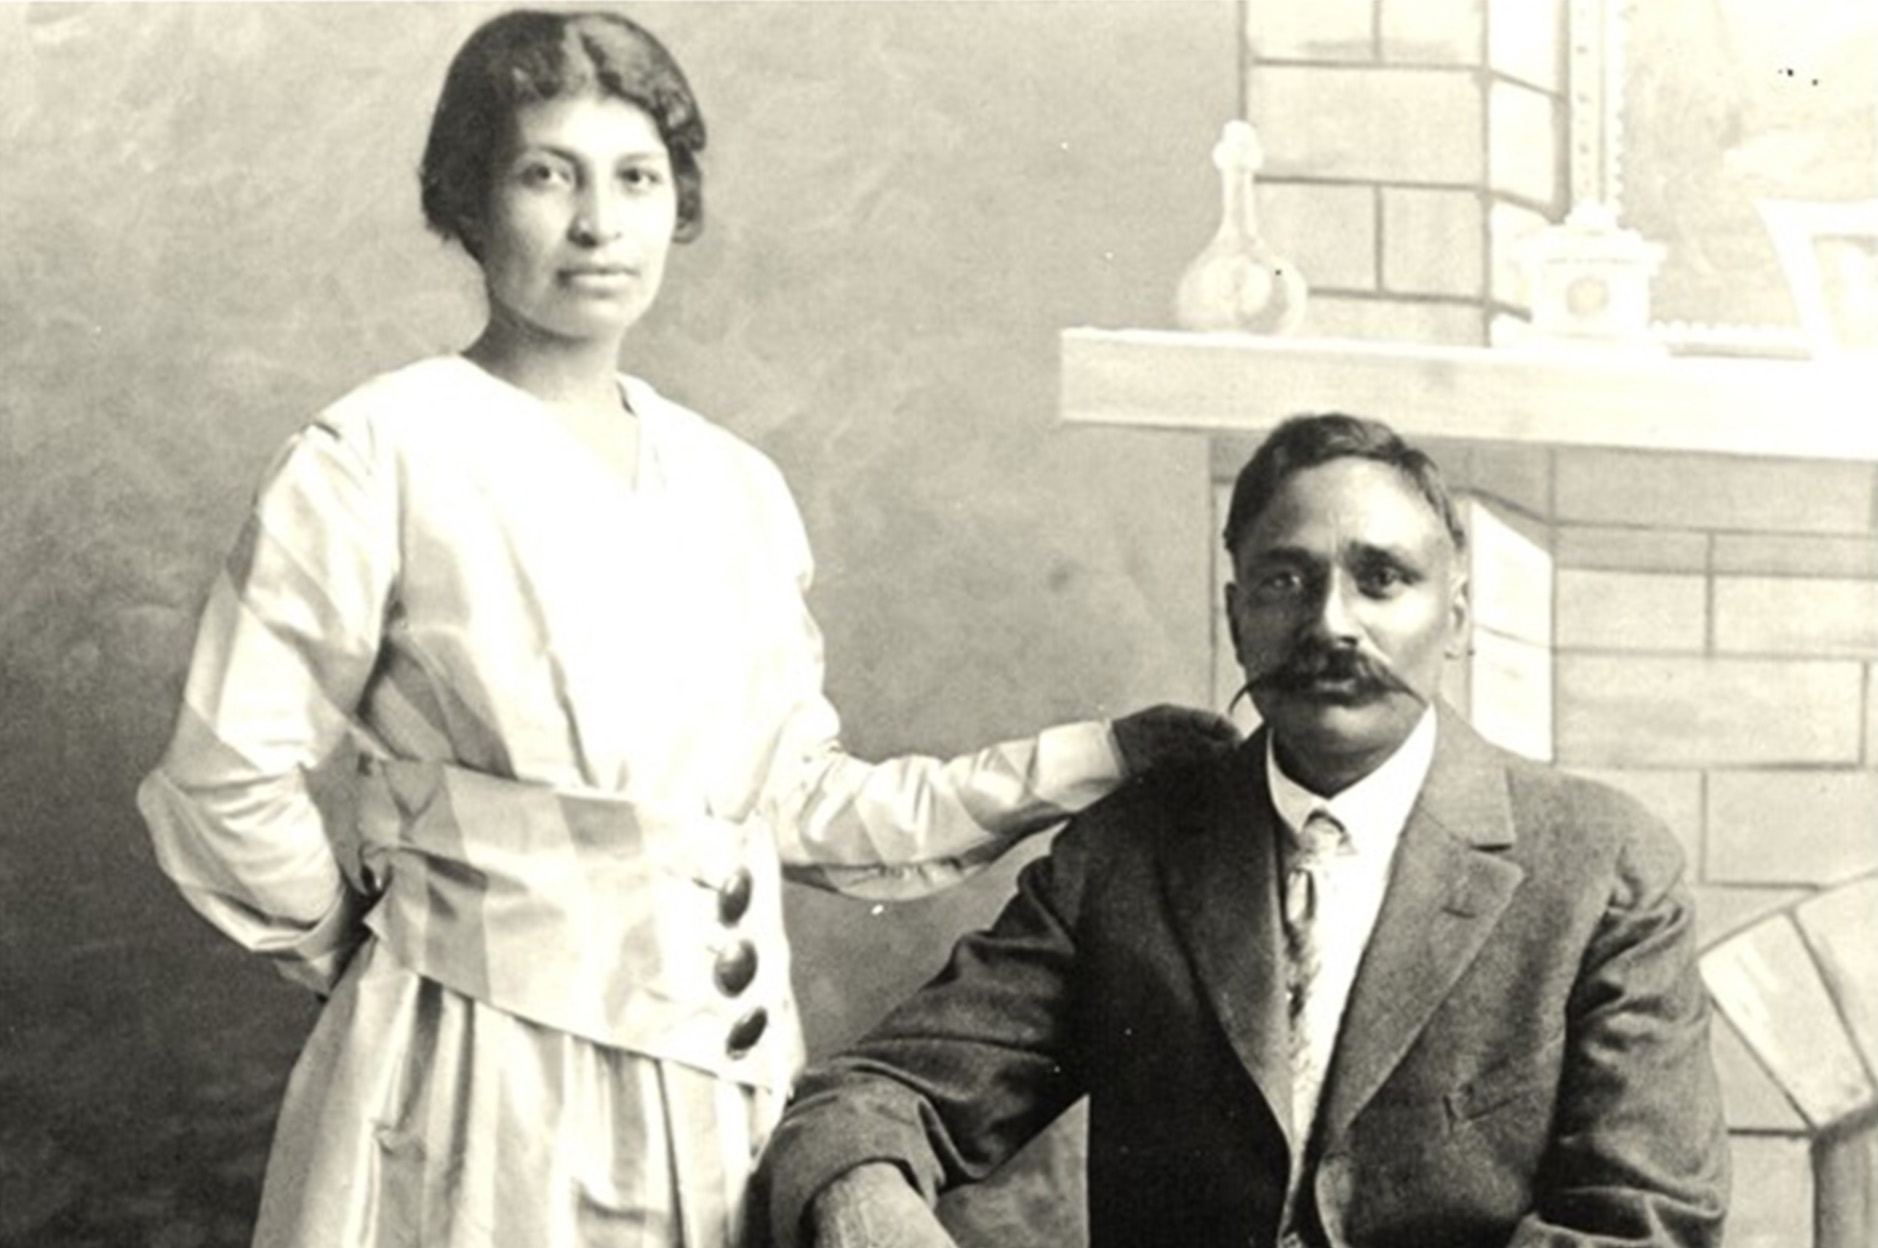 During the early twentieth century, under California's Alien Land Act, Punjabi men were prohibited from owning land. They also could not bring wives from India due to immigration restrictions. Mexican American women worked in cotton fields after the Mexican Civil War. Their marriages created a Punjabi-Mexican American community and culture in the Southwest.